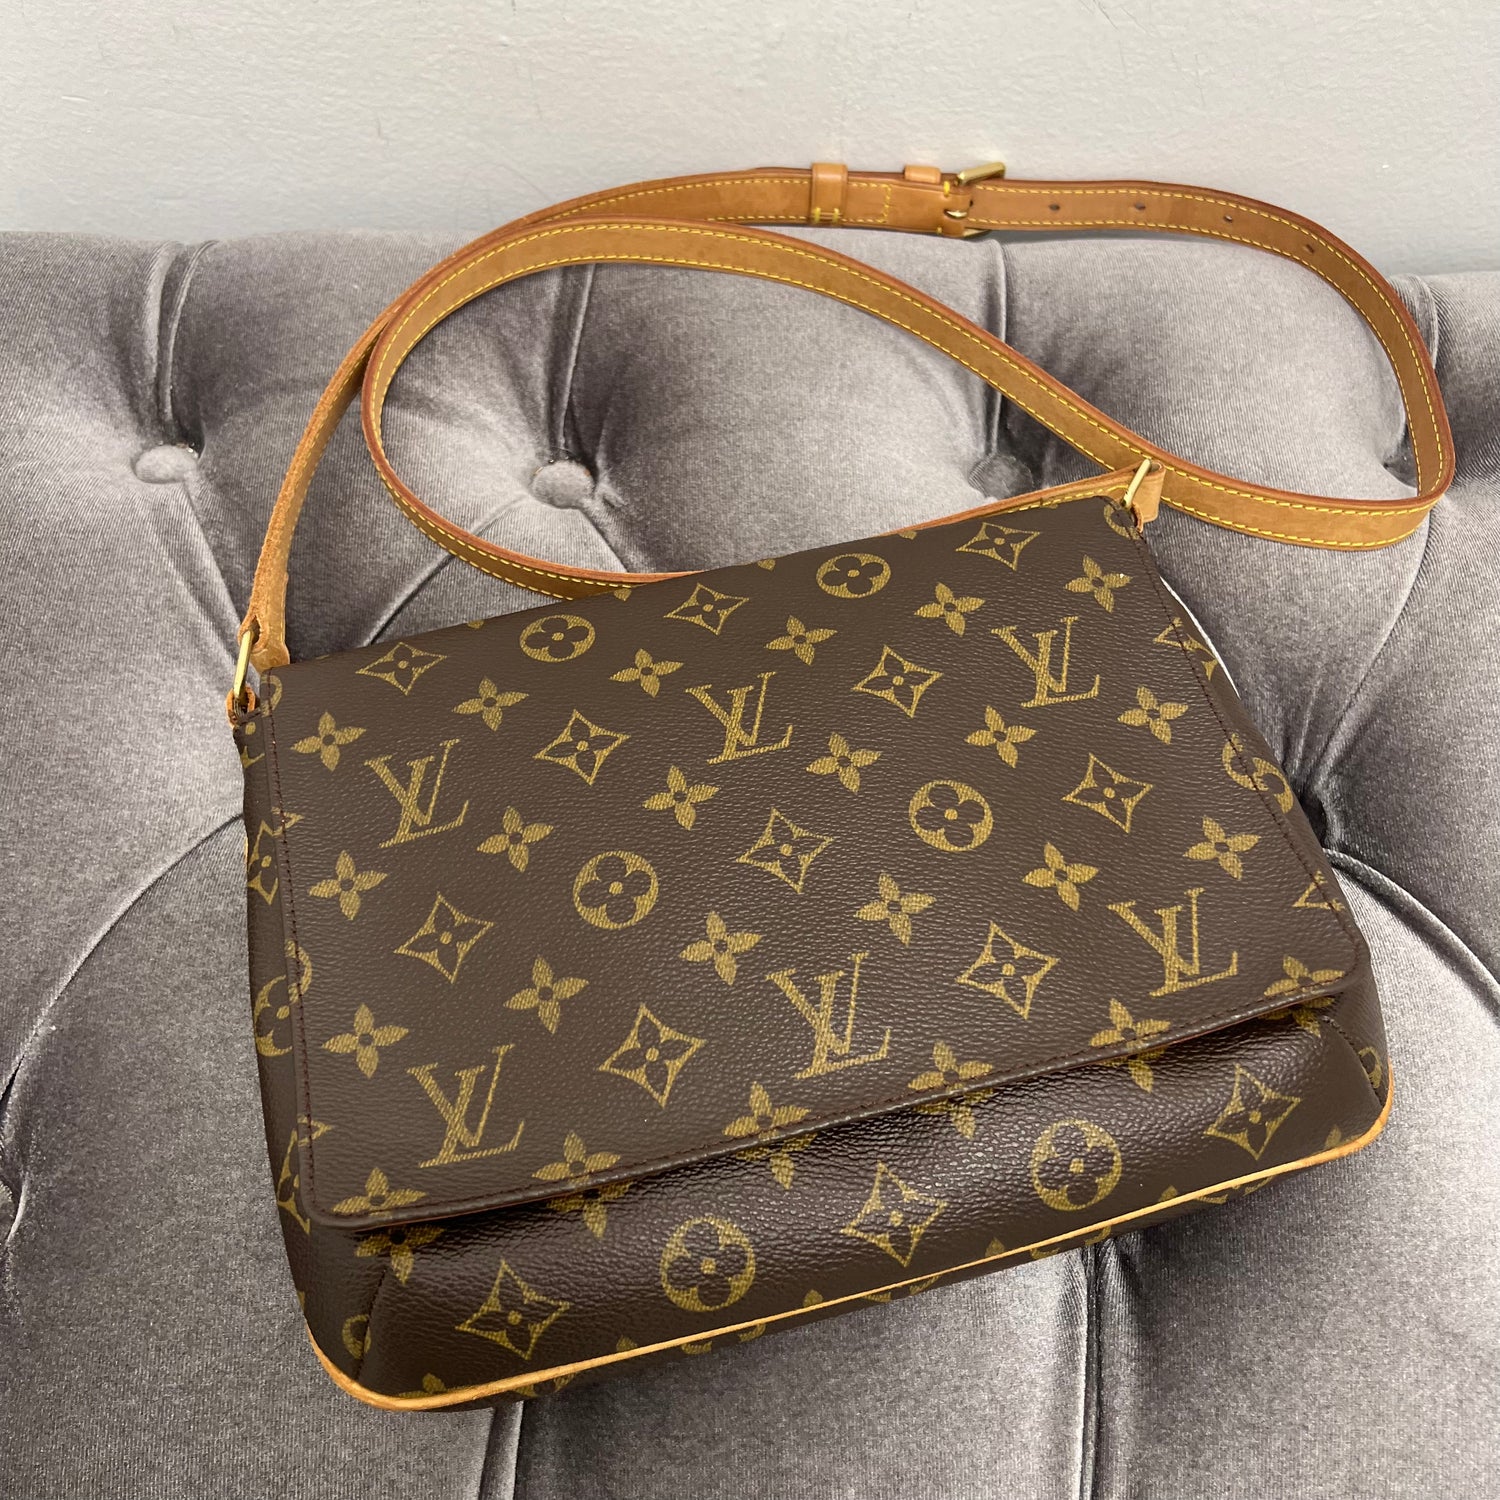 Authentic Louis Vuitton Favorite PM Damier Ebene Crossbody Purse  Louis  vuitton favorite pm, Purses crossbody, Thrift store outfits